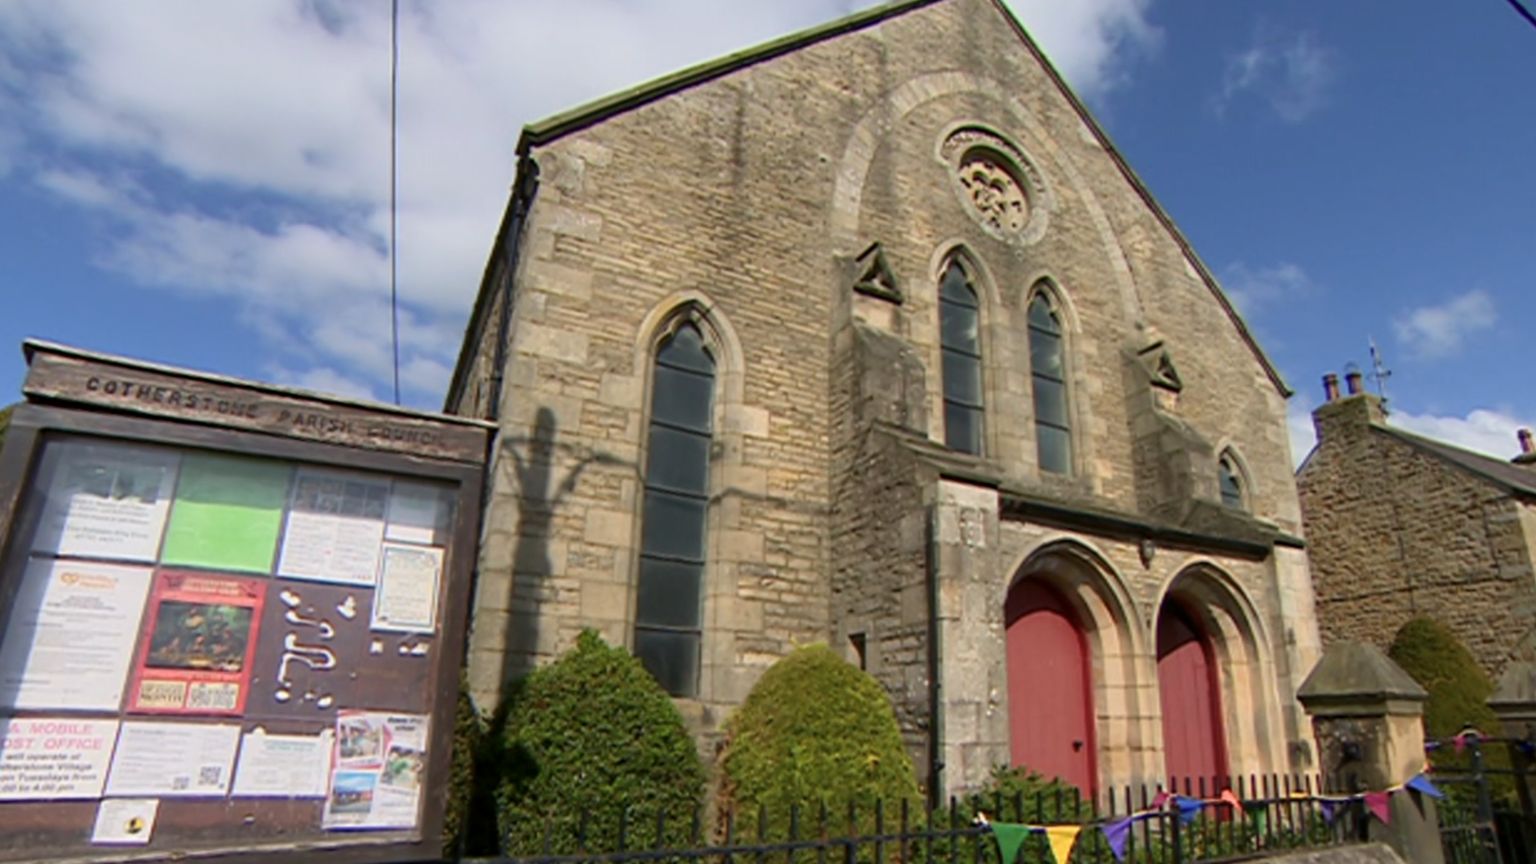 County Durham villagers buy Cotherstones 150-year-old chapel